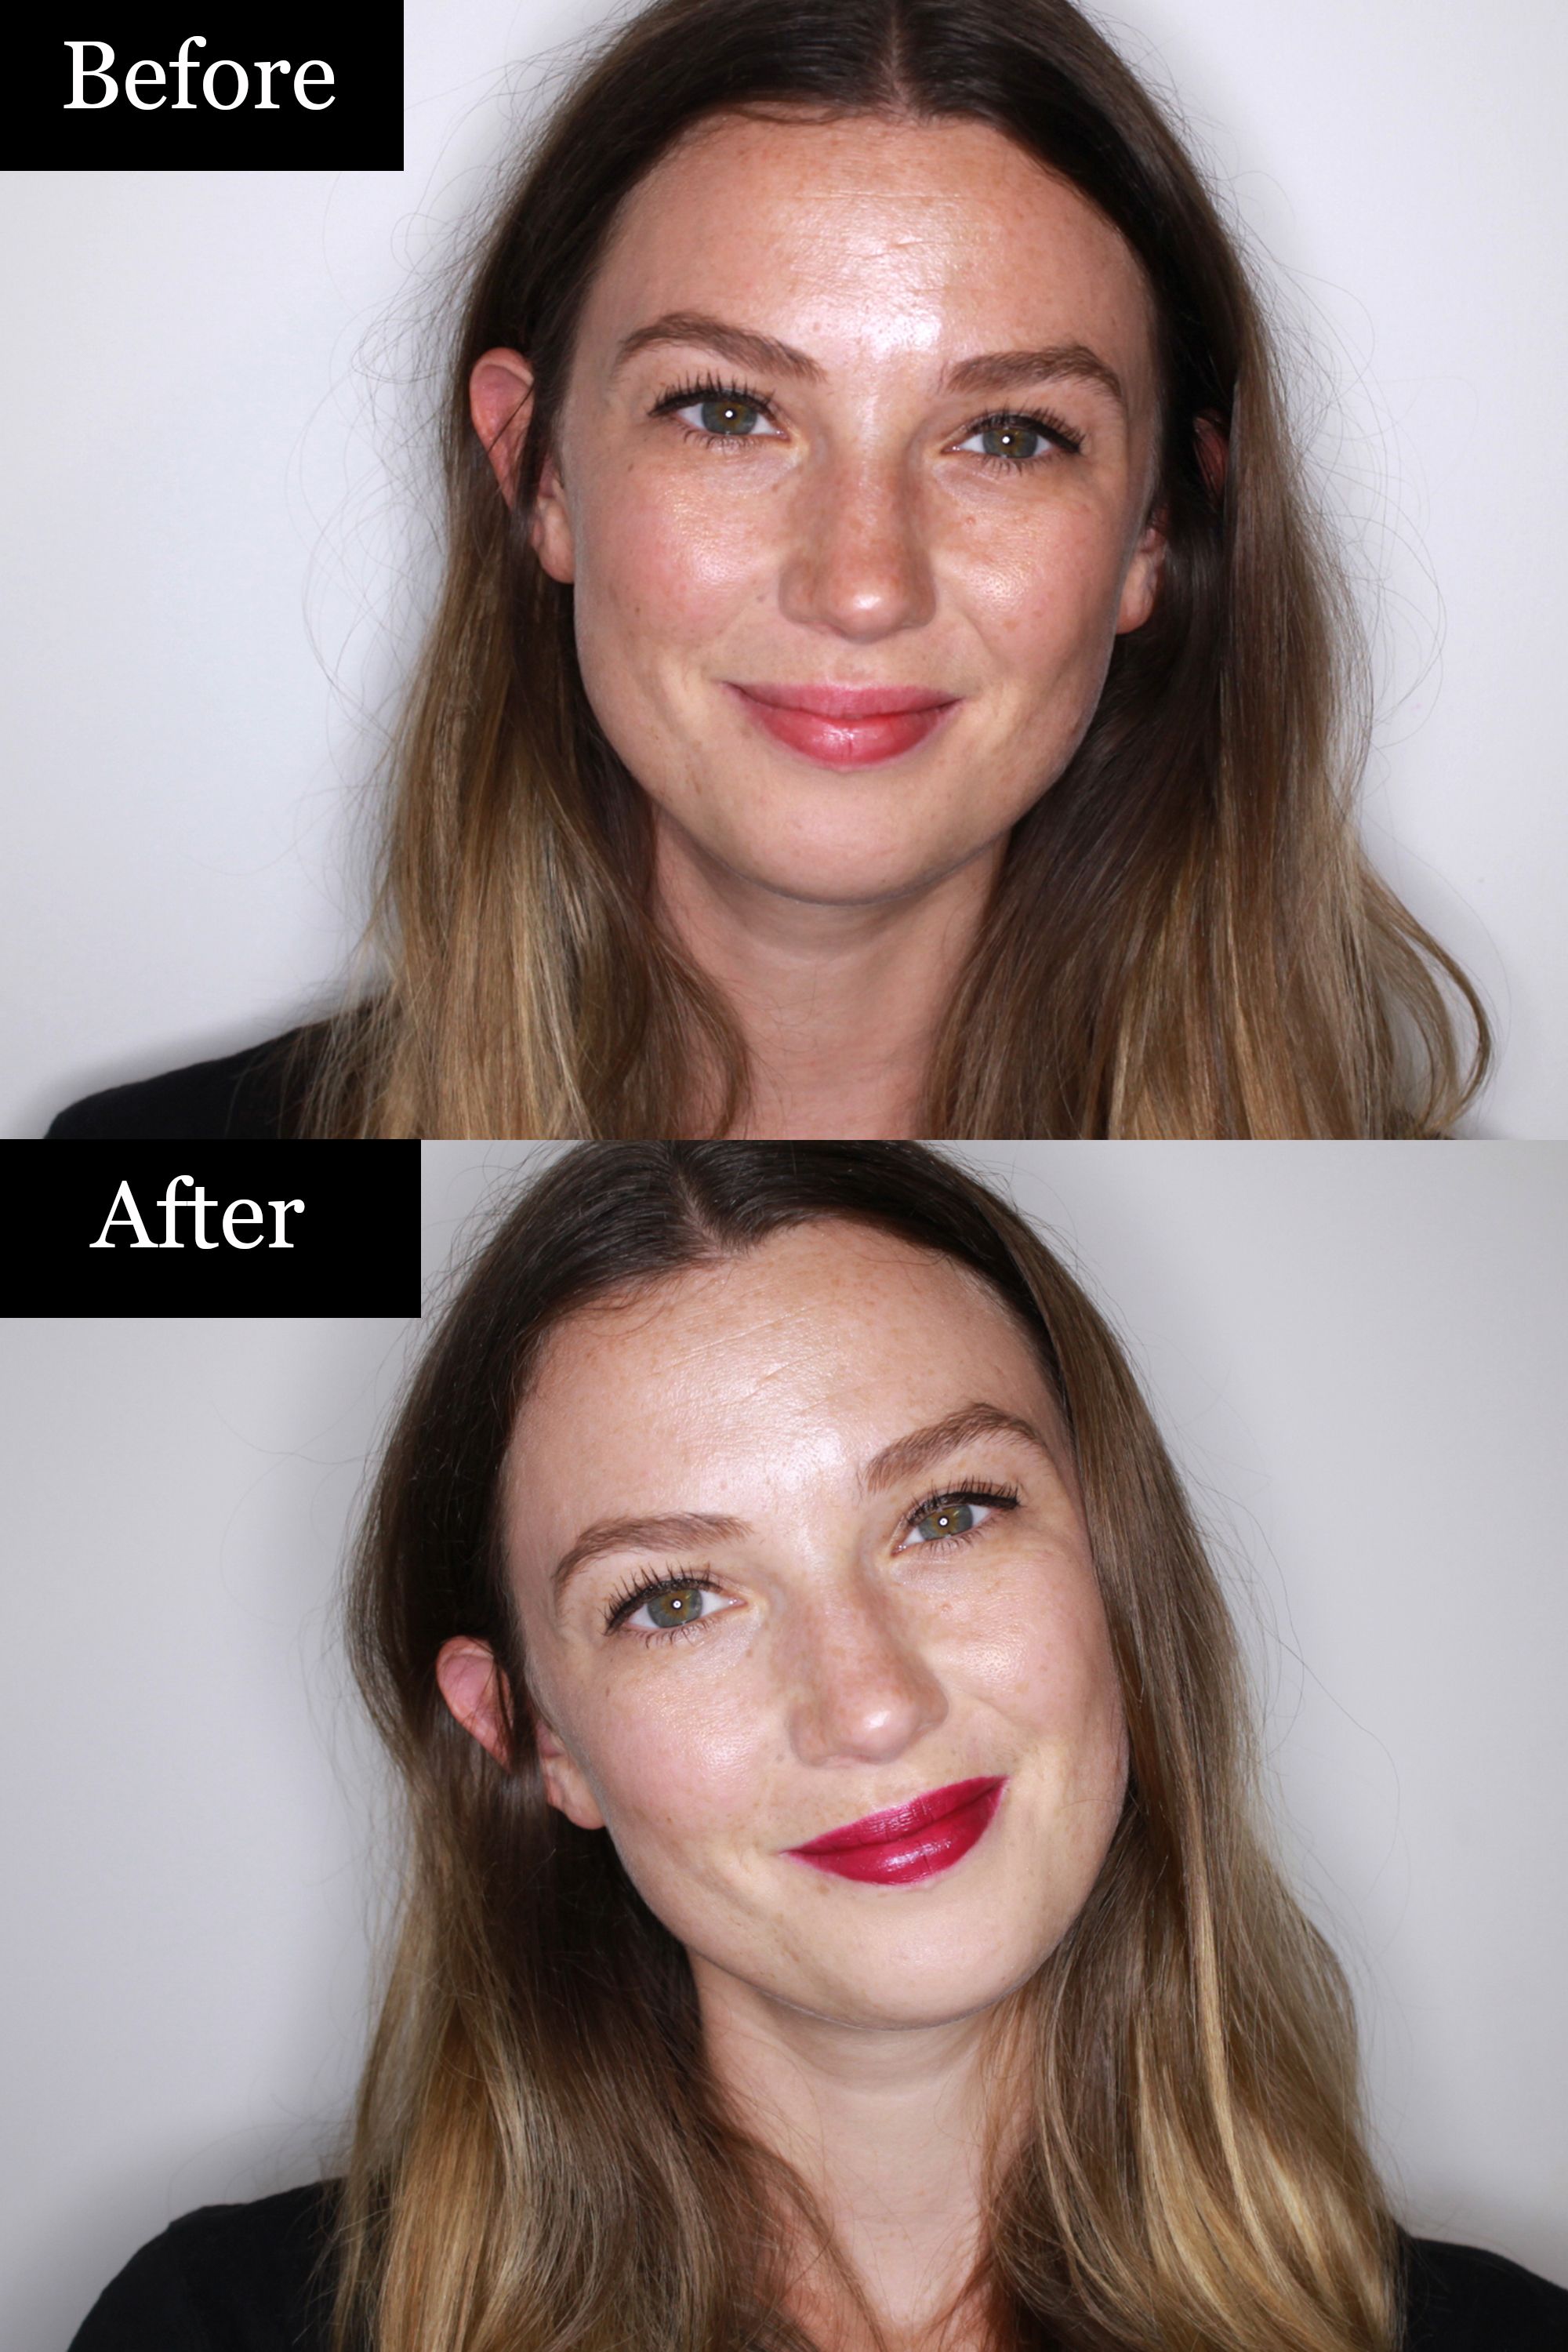 Mac Lipstick 6 Women Get Matched To Their Most Flattering Shade